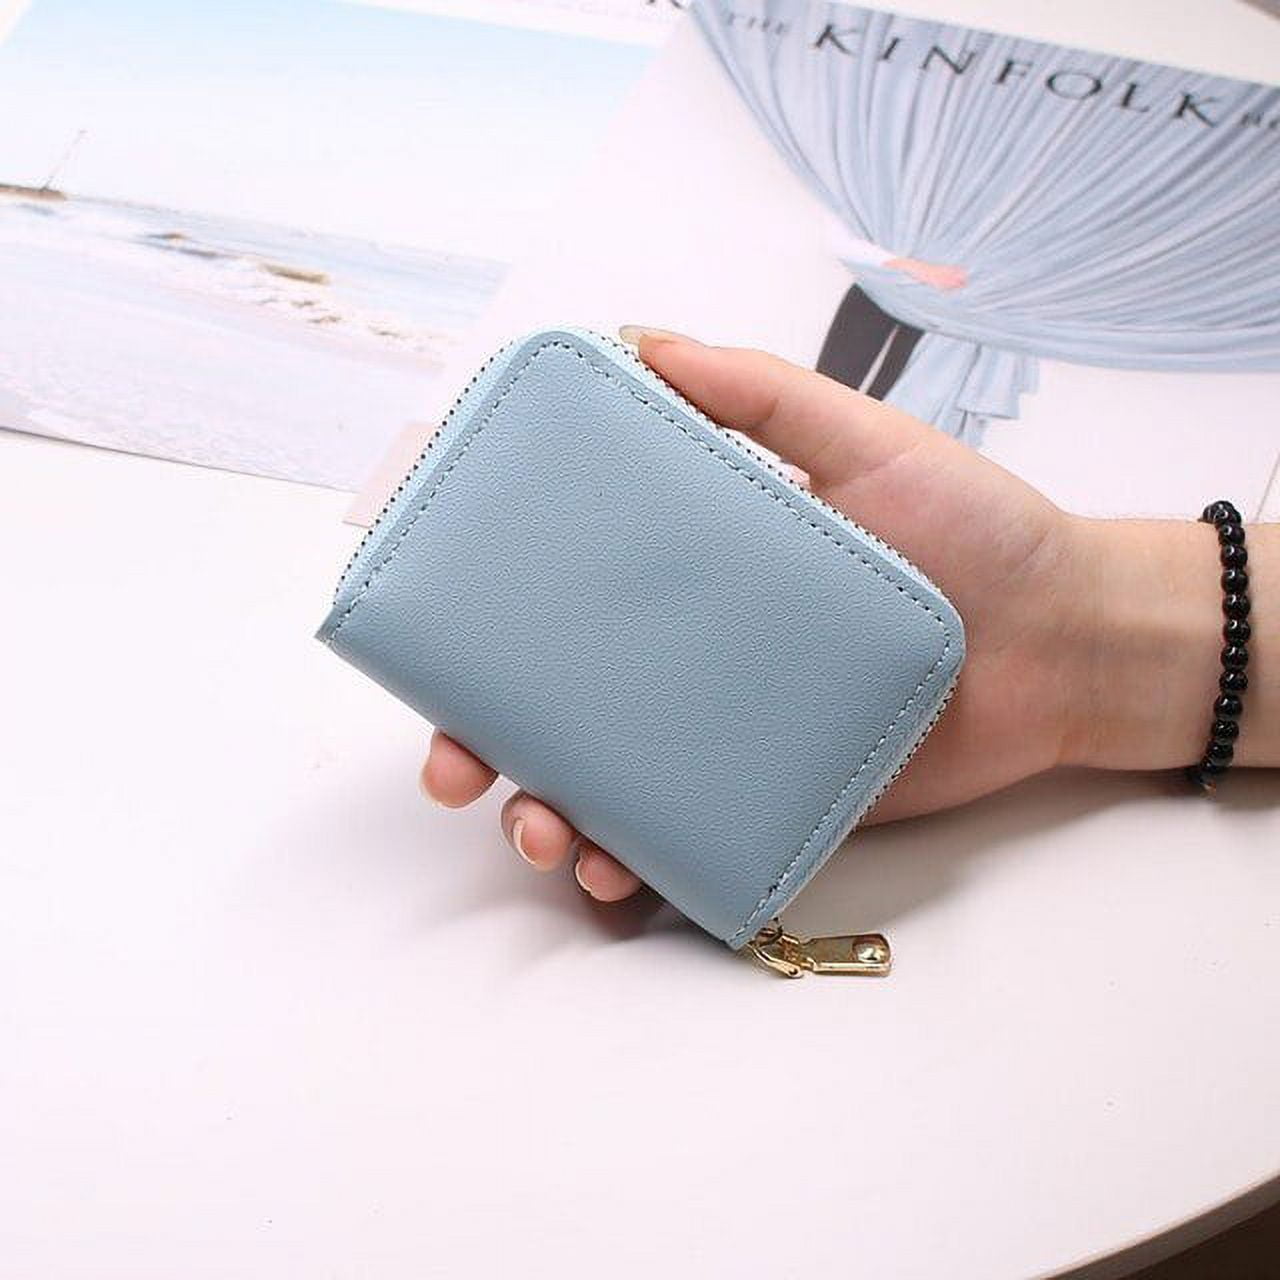 13 Tiny Purses You Would Have Killed For In The Early 2000s — PHOTOS